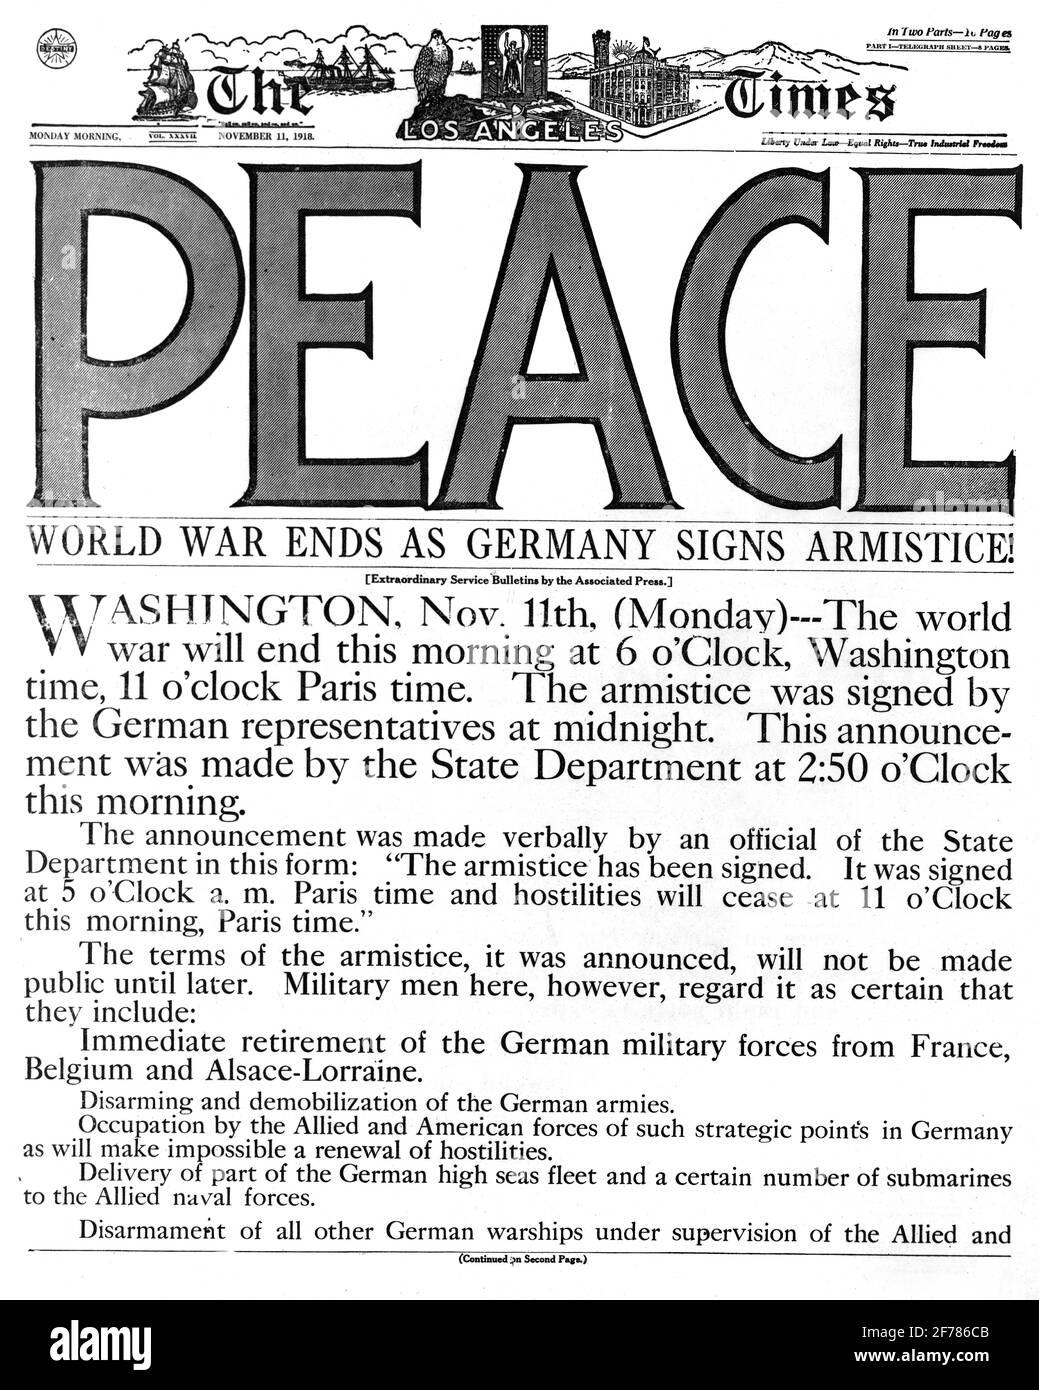 1910s THE LOS ANGELES TIMES NEWSPAPER NOVEMBER 11 1918 HEADLINE PEACE WORLD WAR ENDS GERMANY SIGNS ARMISTICE LOS ANGELES CA USA - asp h1074 ASP001 HARS ENDS LOS ANGELES OLD FASHIONED TREATY WORLD WAR I Stock Photo